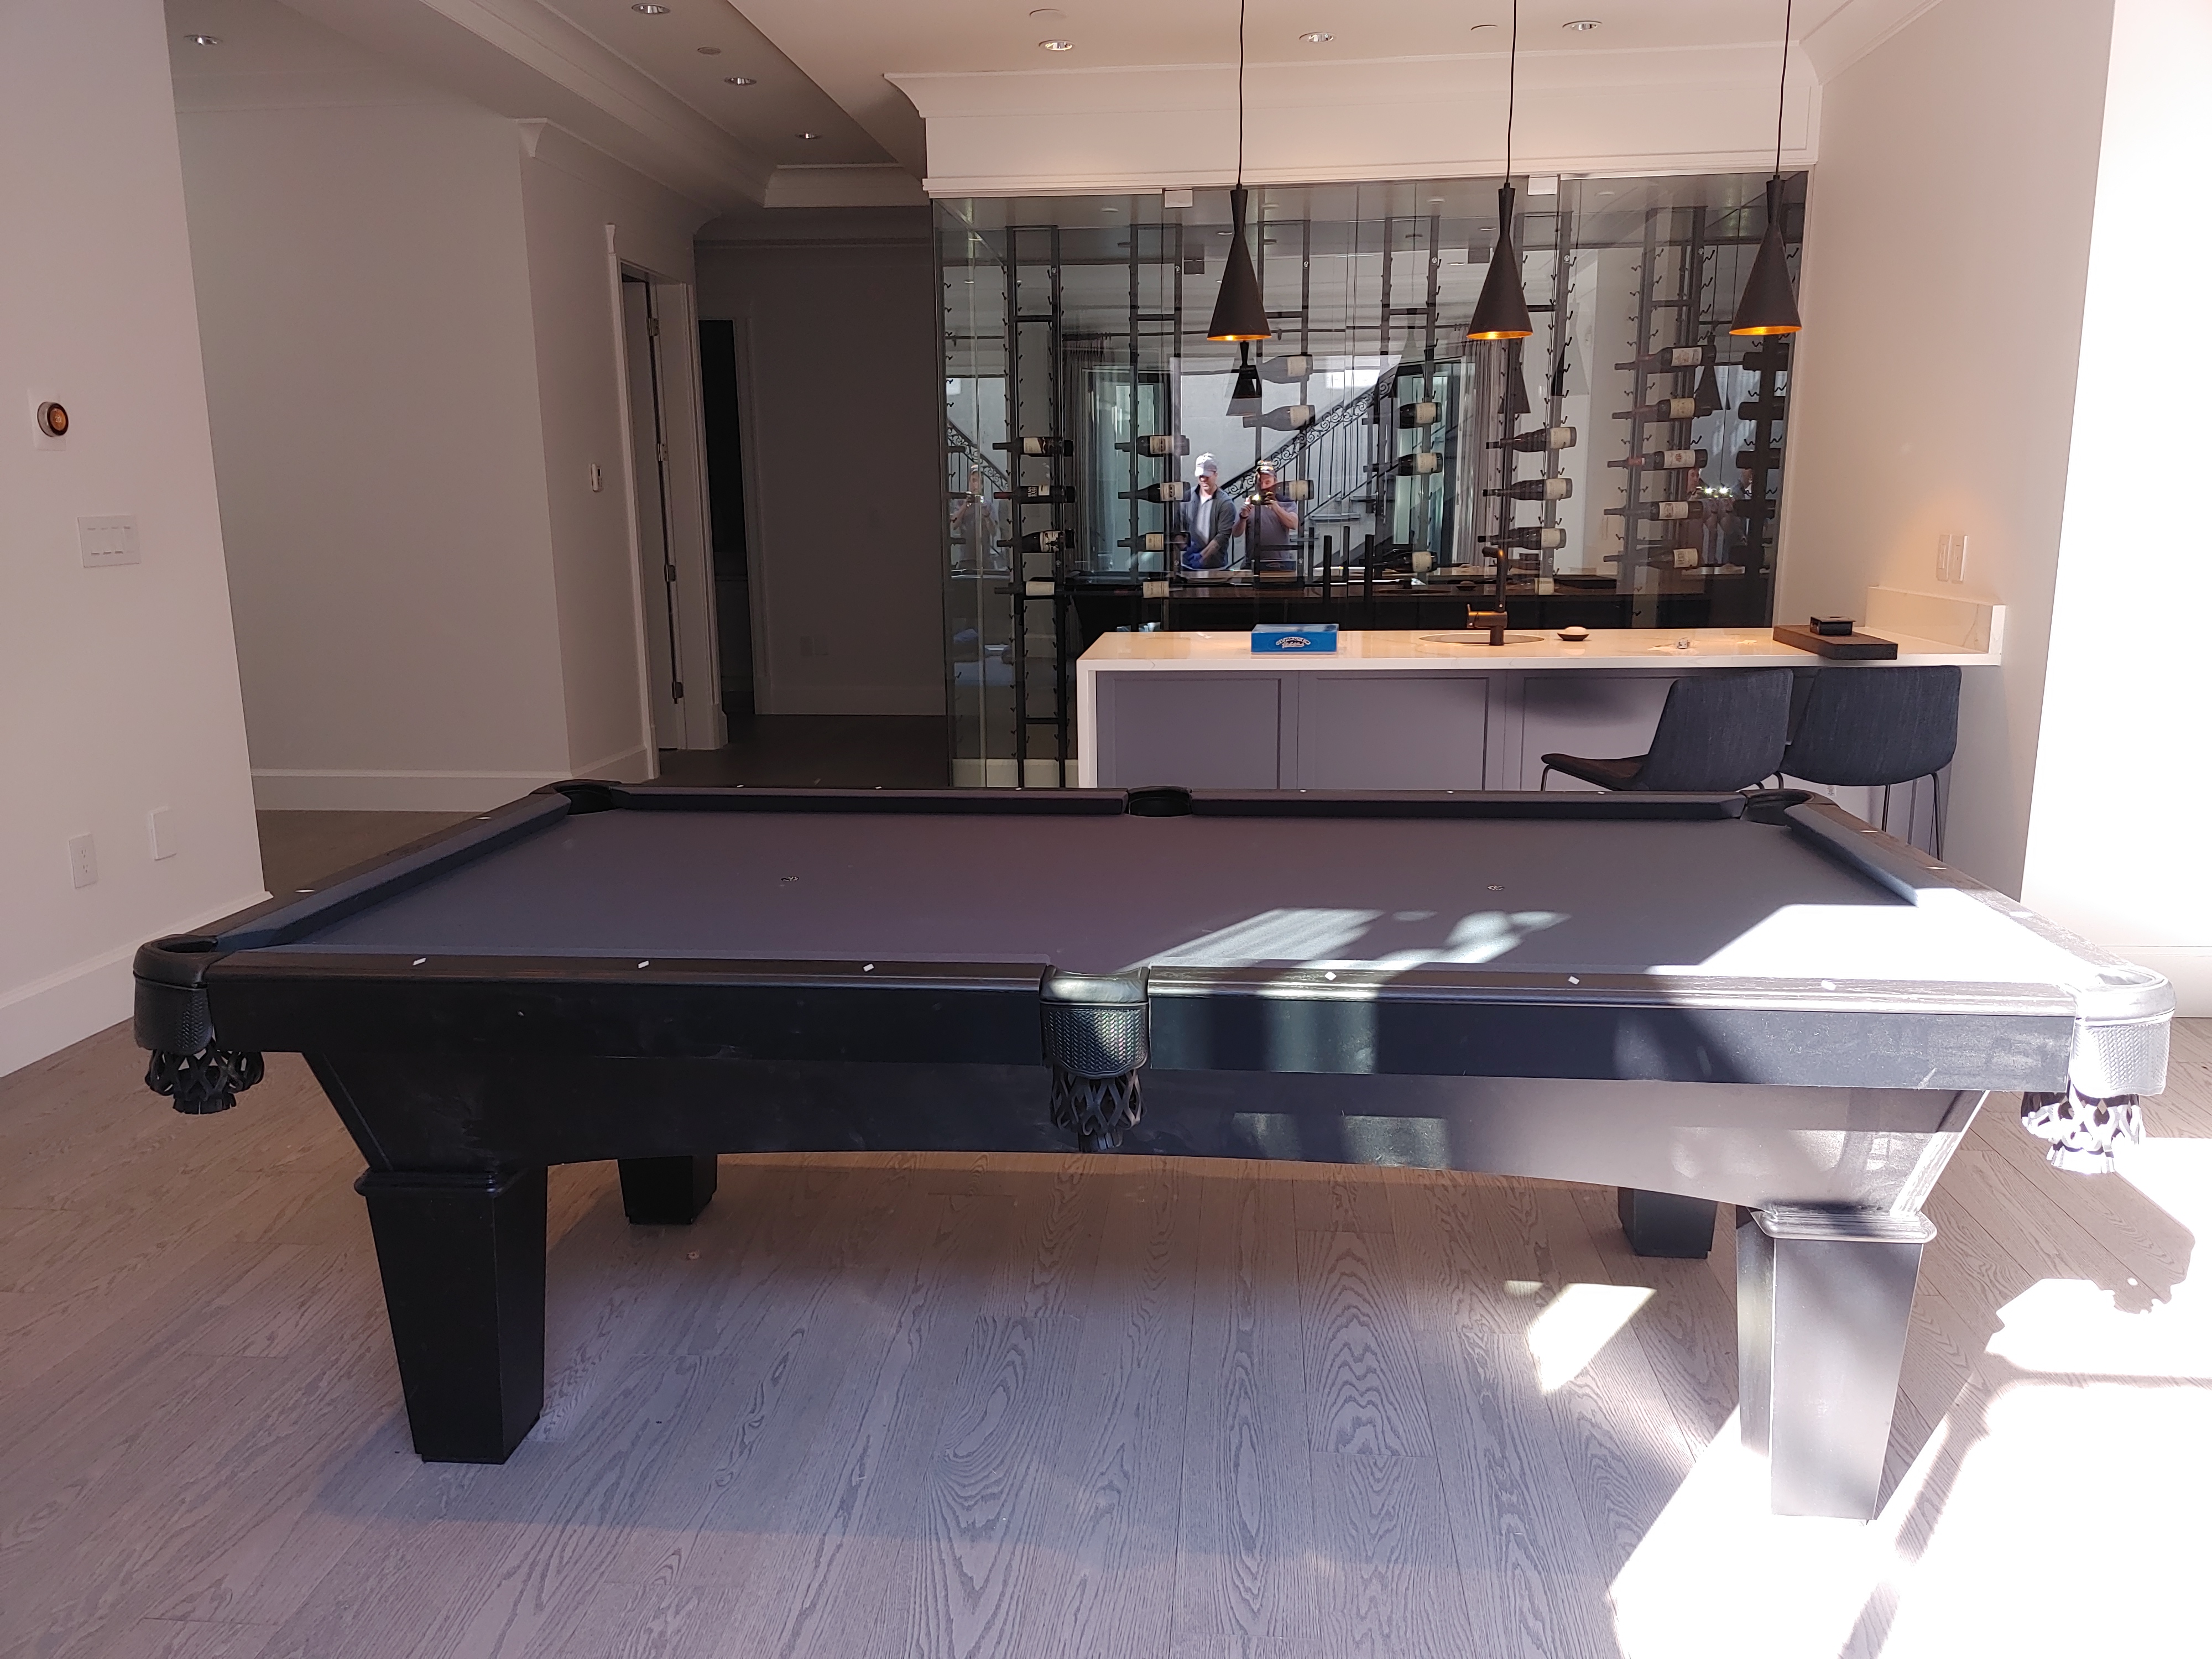 A pool table with dark cloth in a wood floor room with glass wine rack and bar in background.